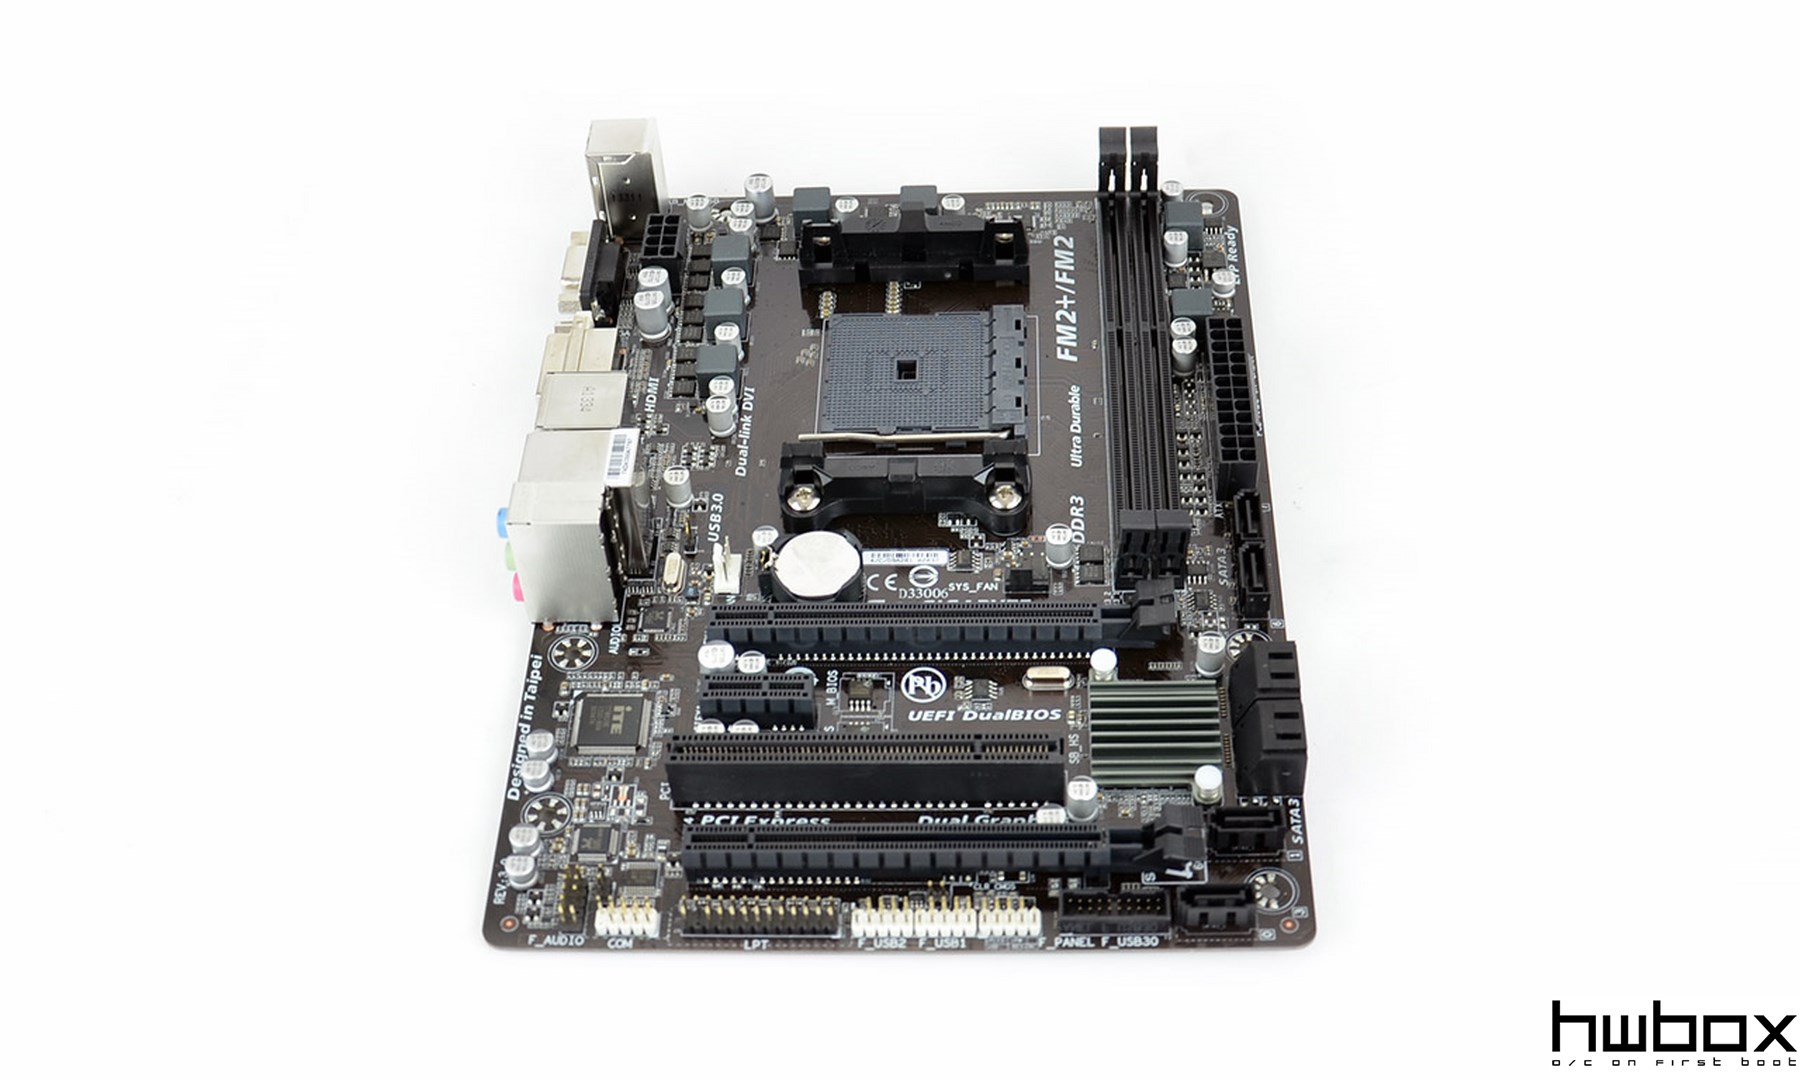 Gigabyte F2A88XM-HD3 Review: Value A88X board